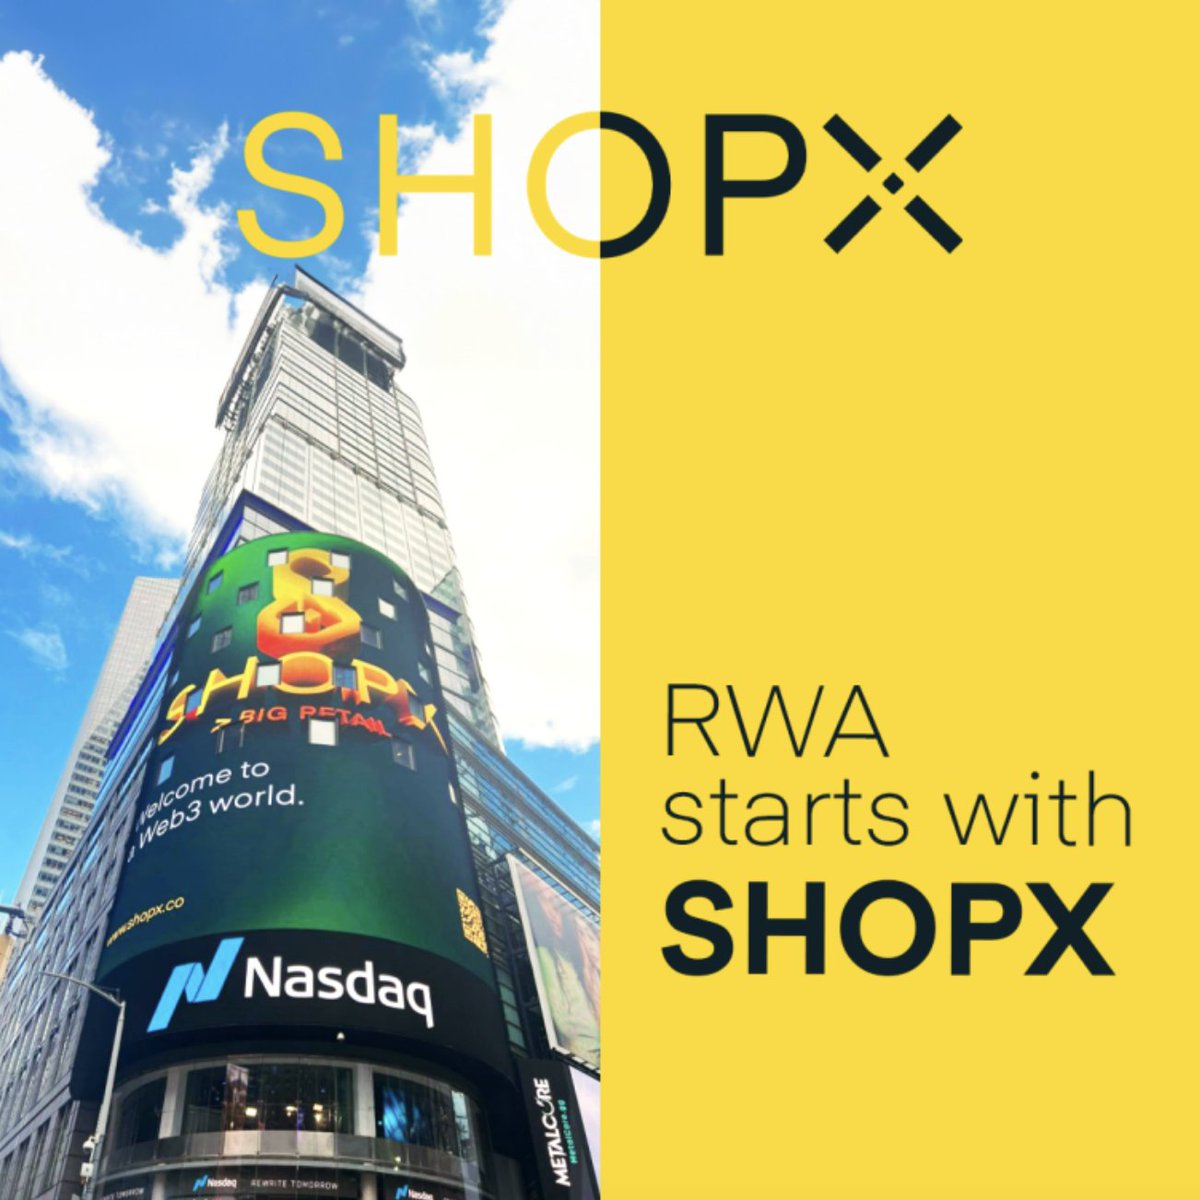 ❎ It's officially #RWASeason with $SHOPX ❎ 

Don't miss out on the #RWASeason frenzy ignited by $SHOPX! 

From pioneering partnerships to community-driven incentives in #ETH, the future of commerce has never looked brighter. 

Let's make history together! #Web3 #NFT